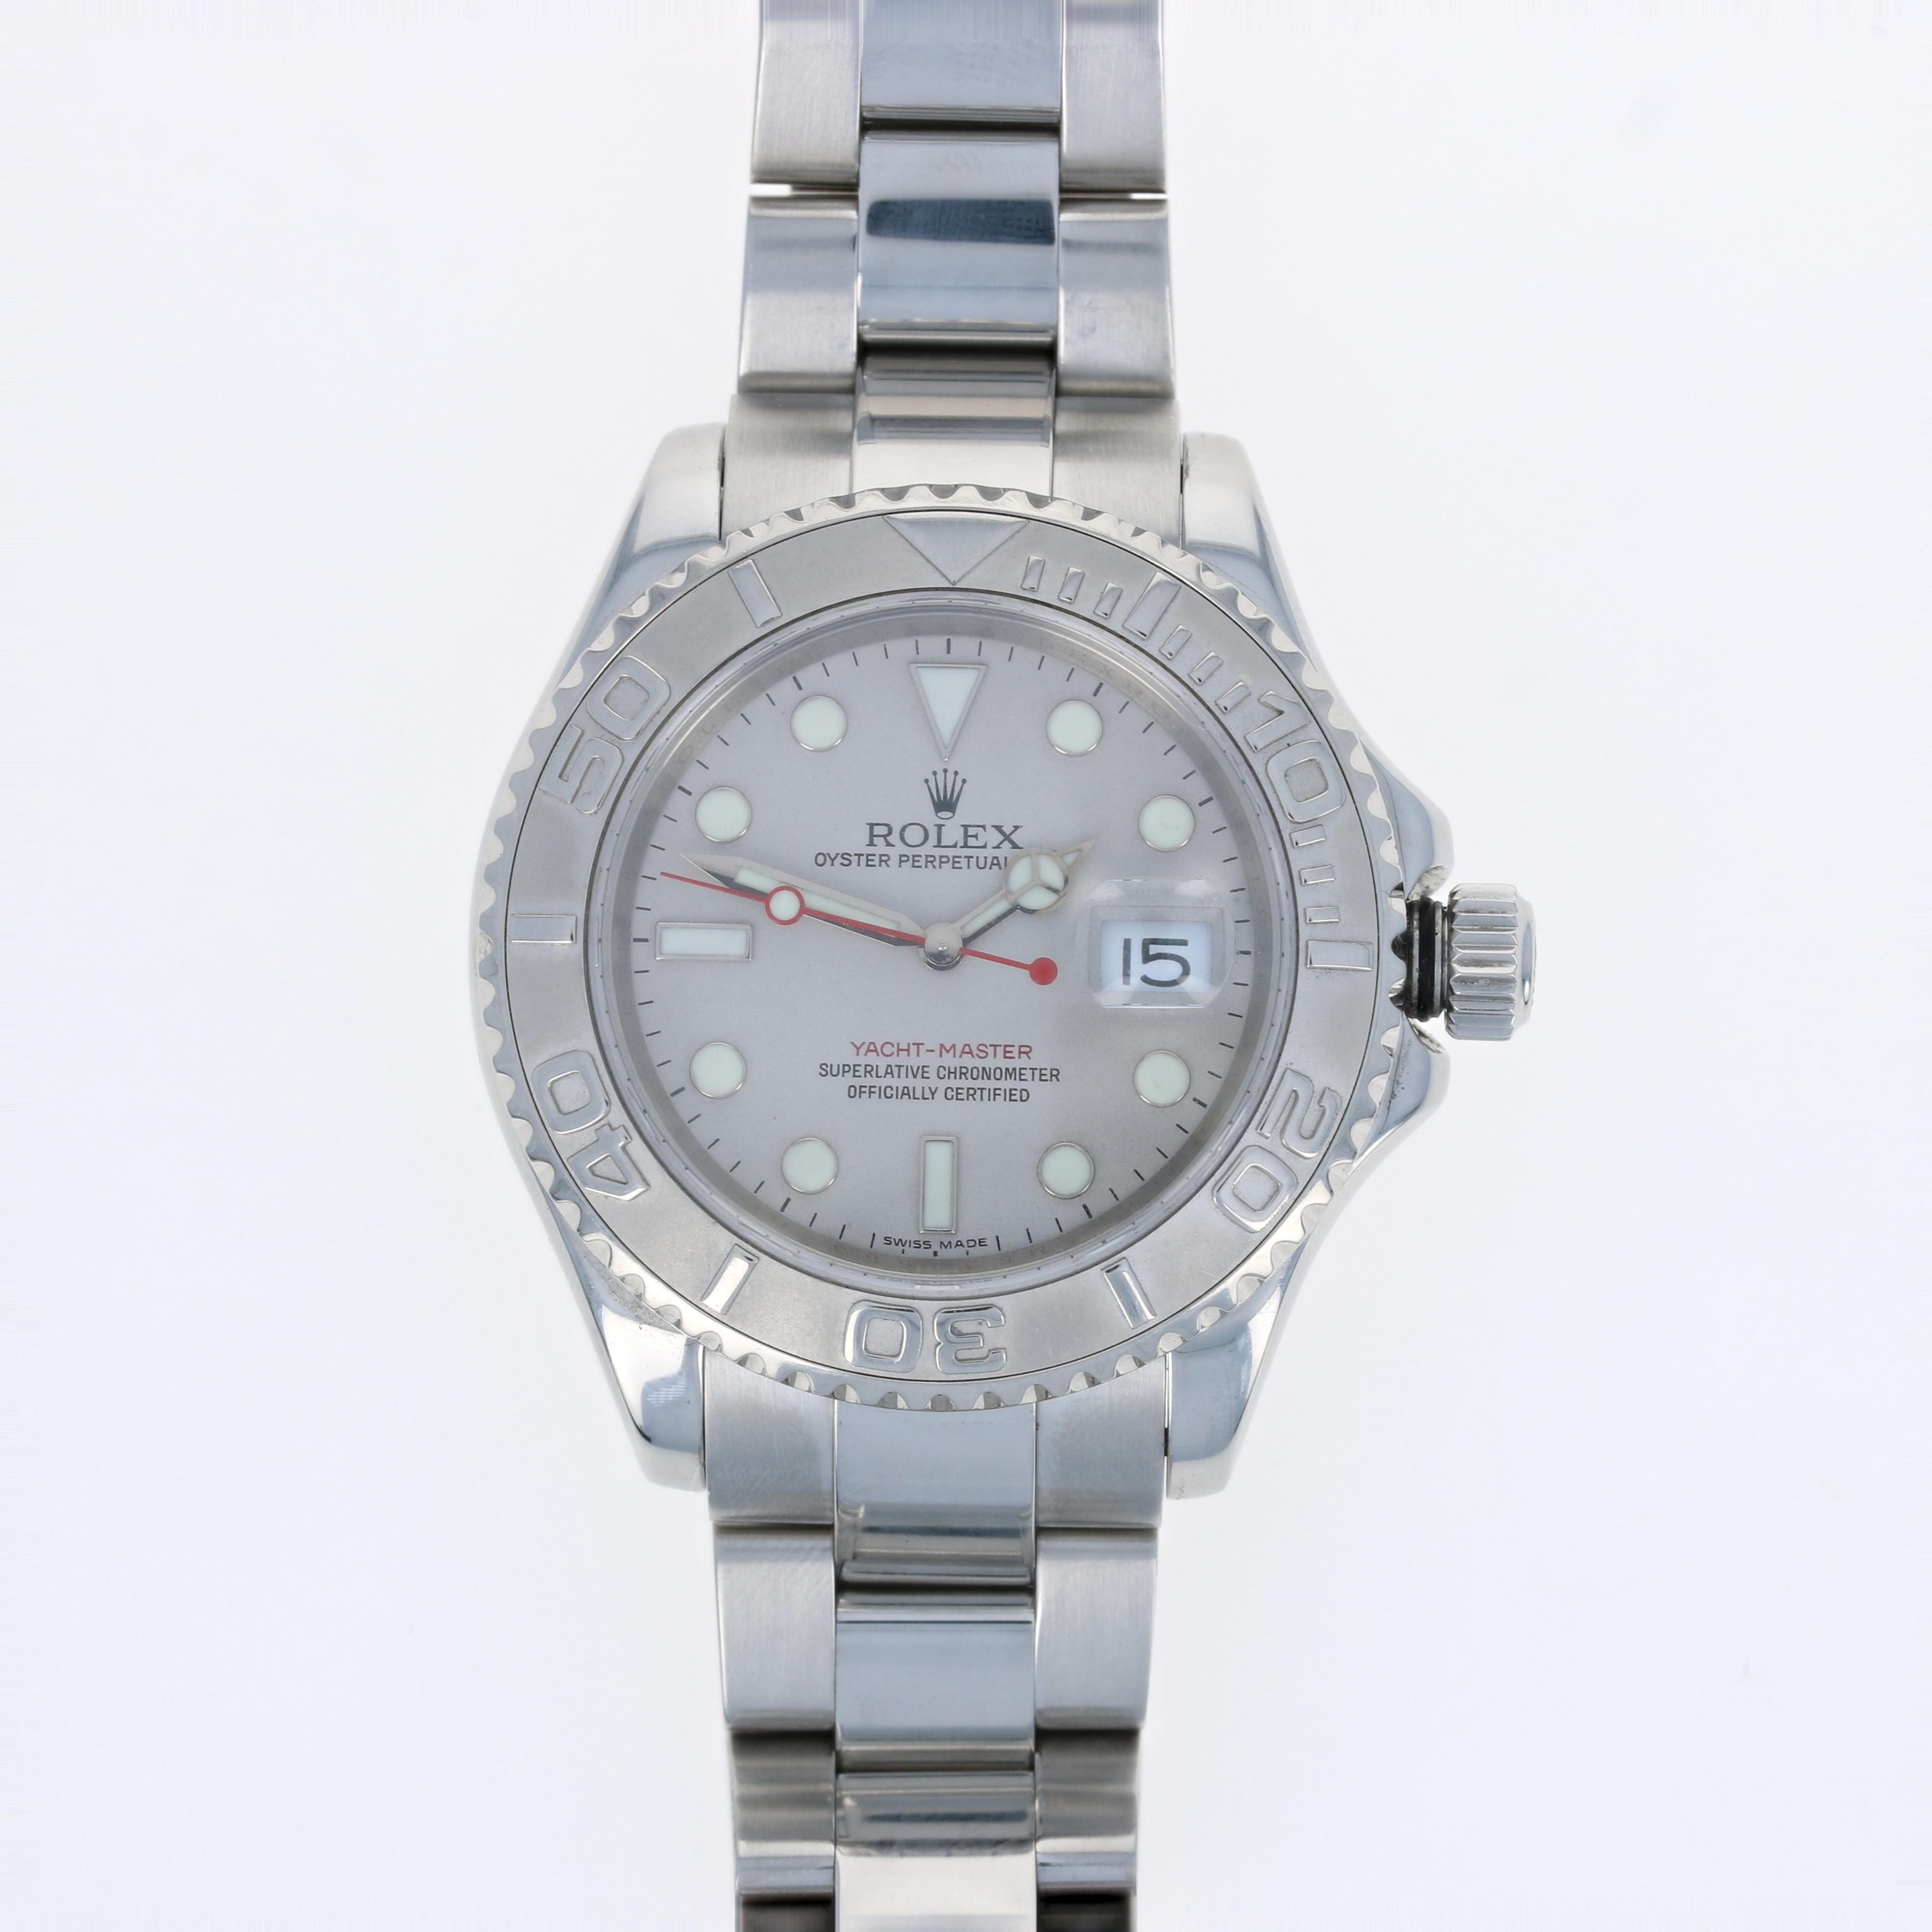 This is an authentic Rolex wristwatch. The watch has been professionally serviced and comes with a two-year warranty, the Rolex boxes, and papers.

Brand: Rolex Yacht-Master
Model Number: 16622
Year: 2007
Material: Stainless Steel (case & band) with